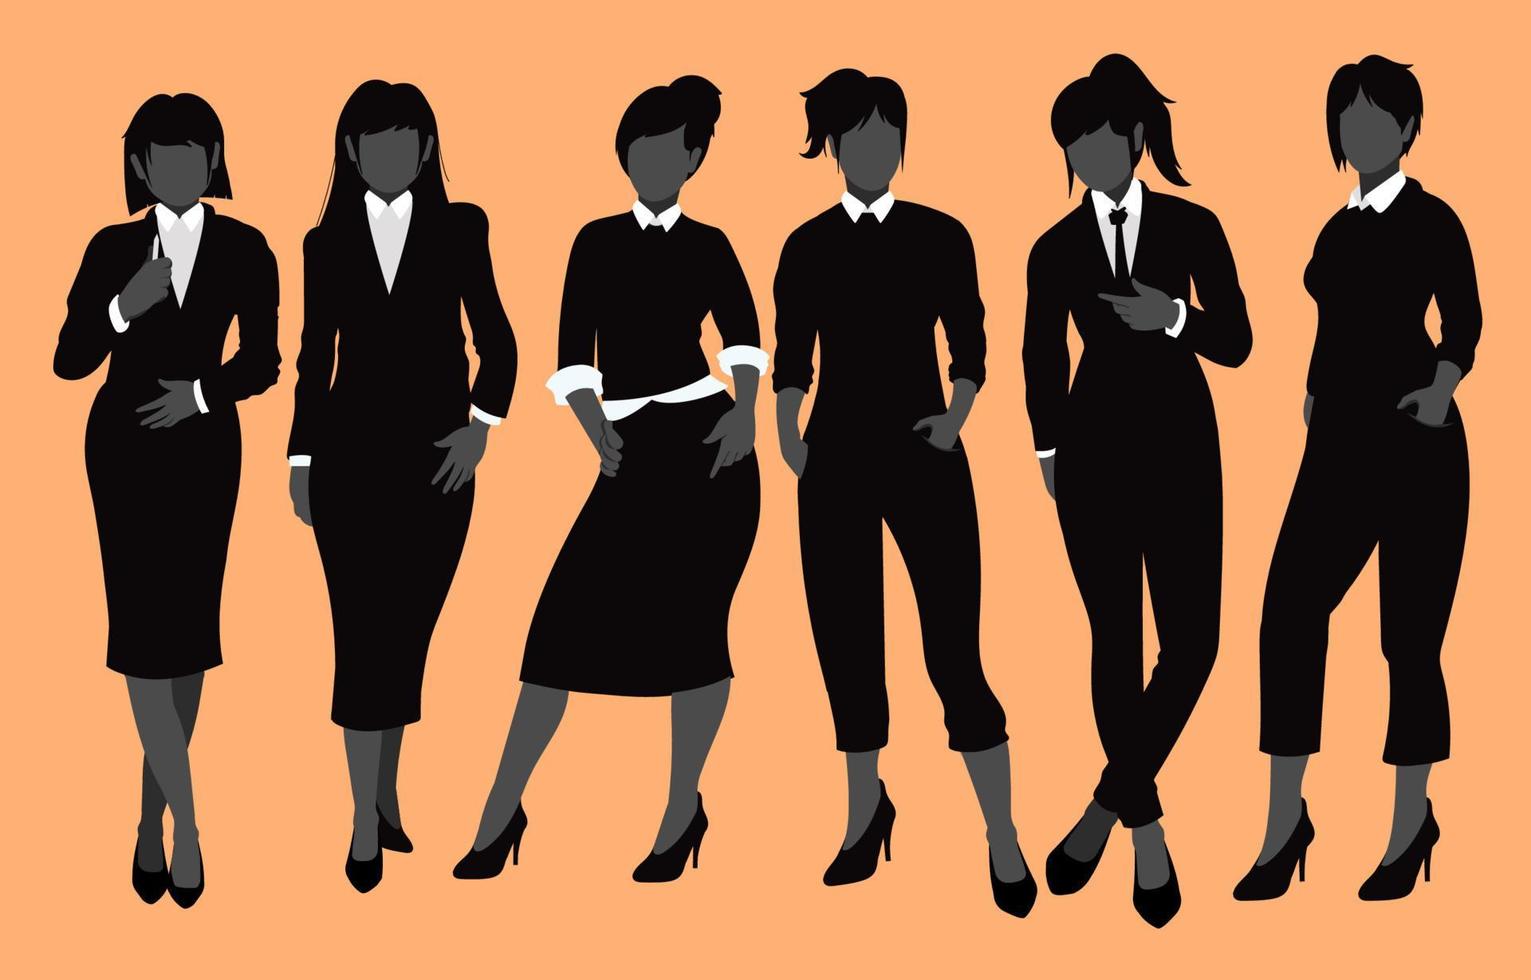 Women Office Silhouette Pose vector